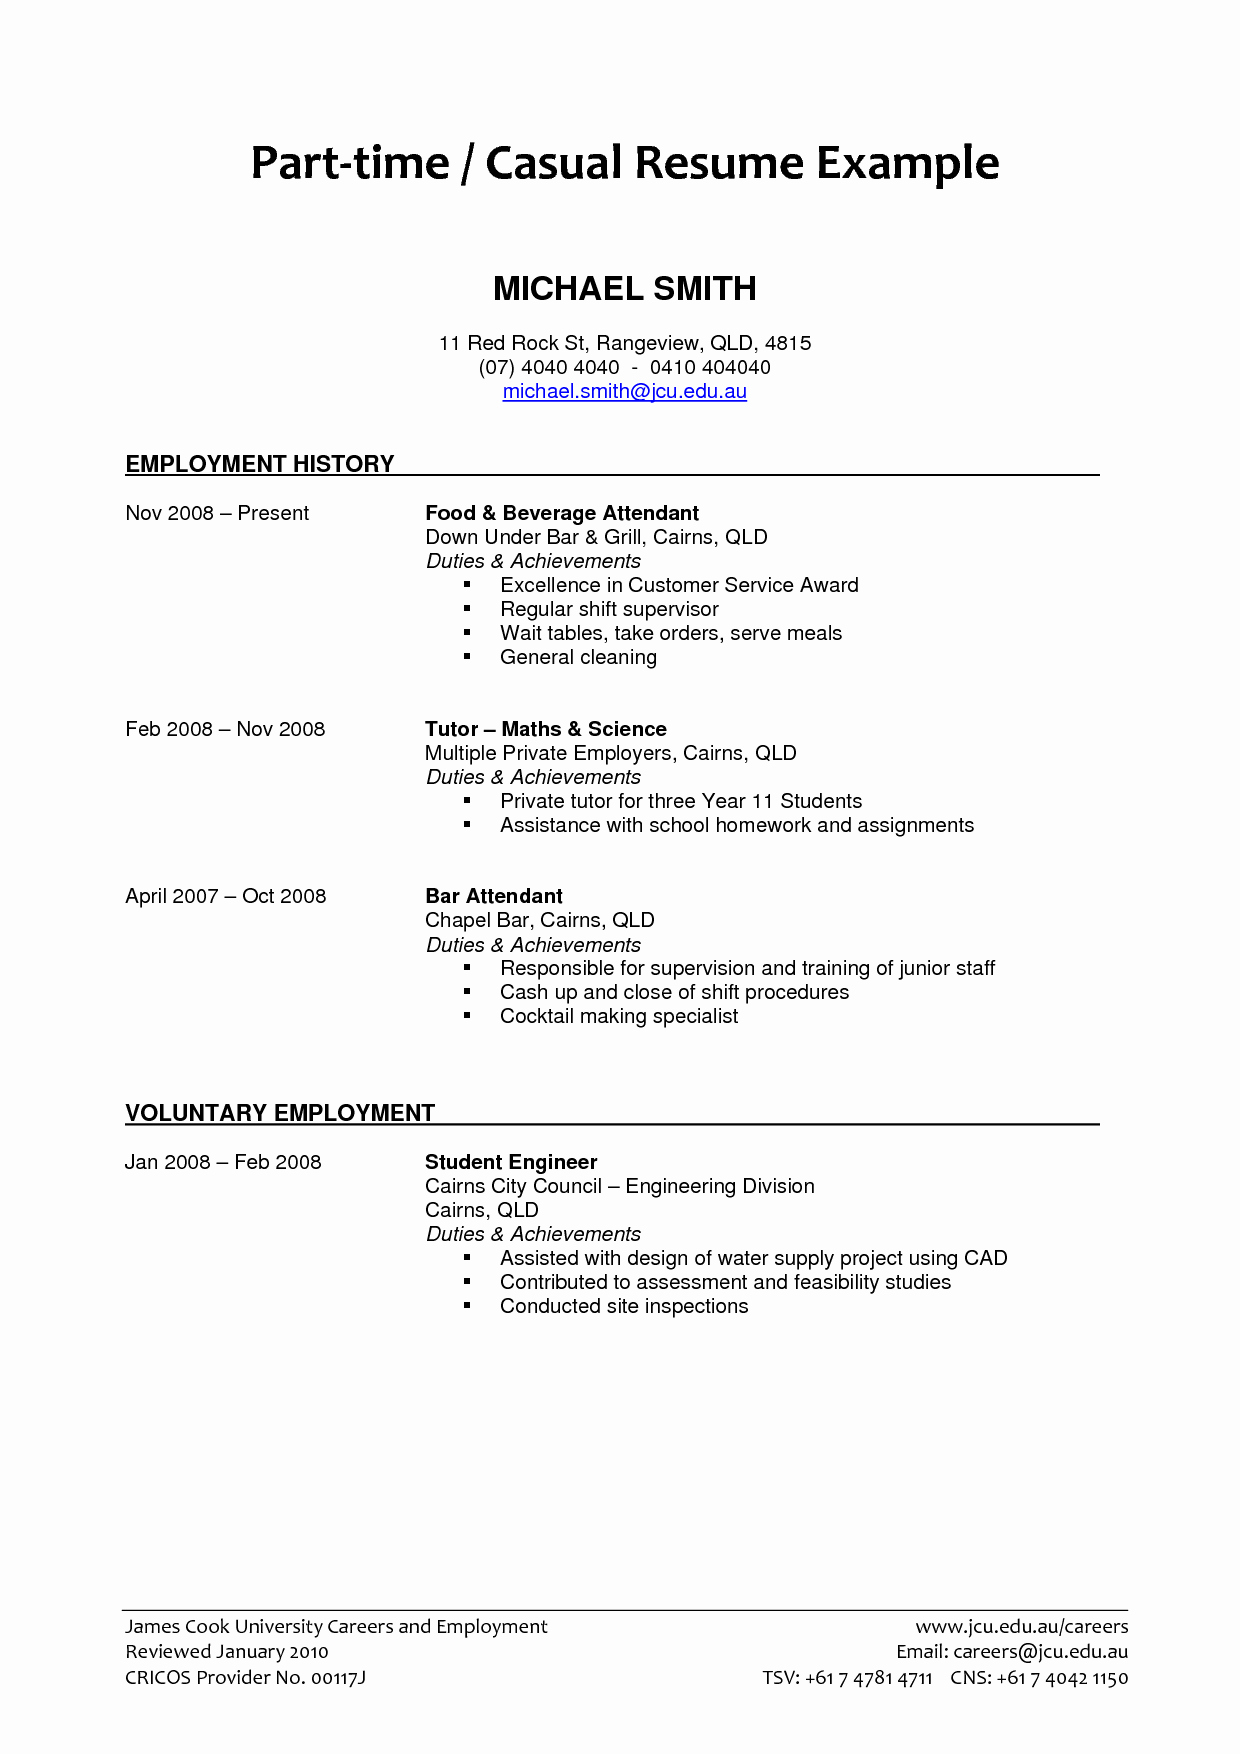 Part Time Job Resume Examples 2018